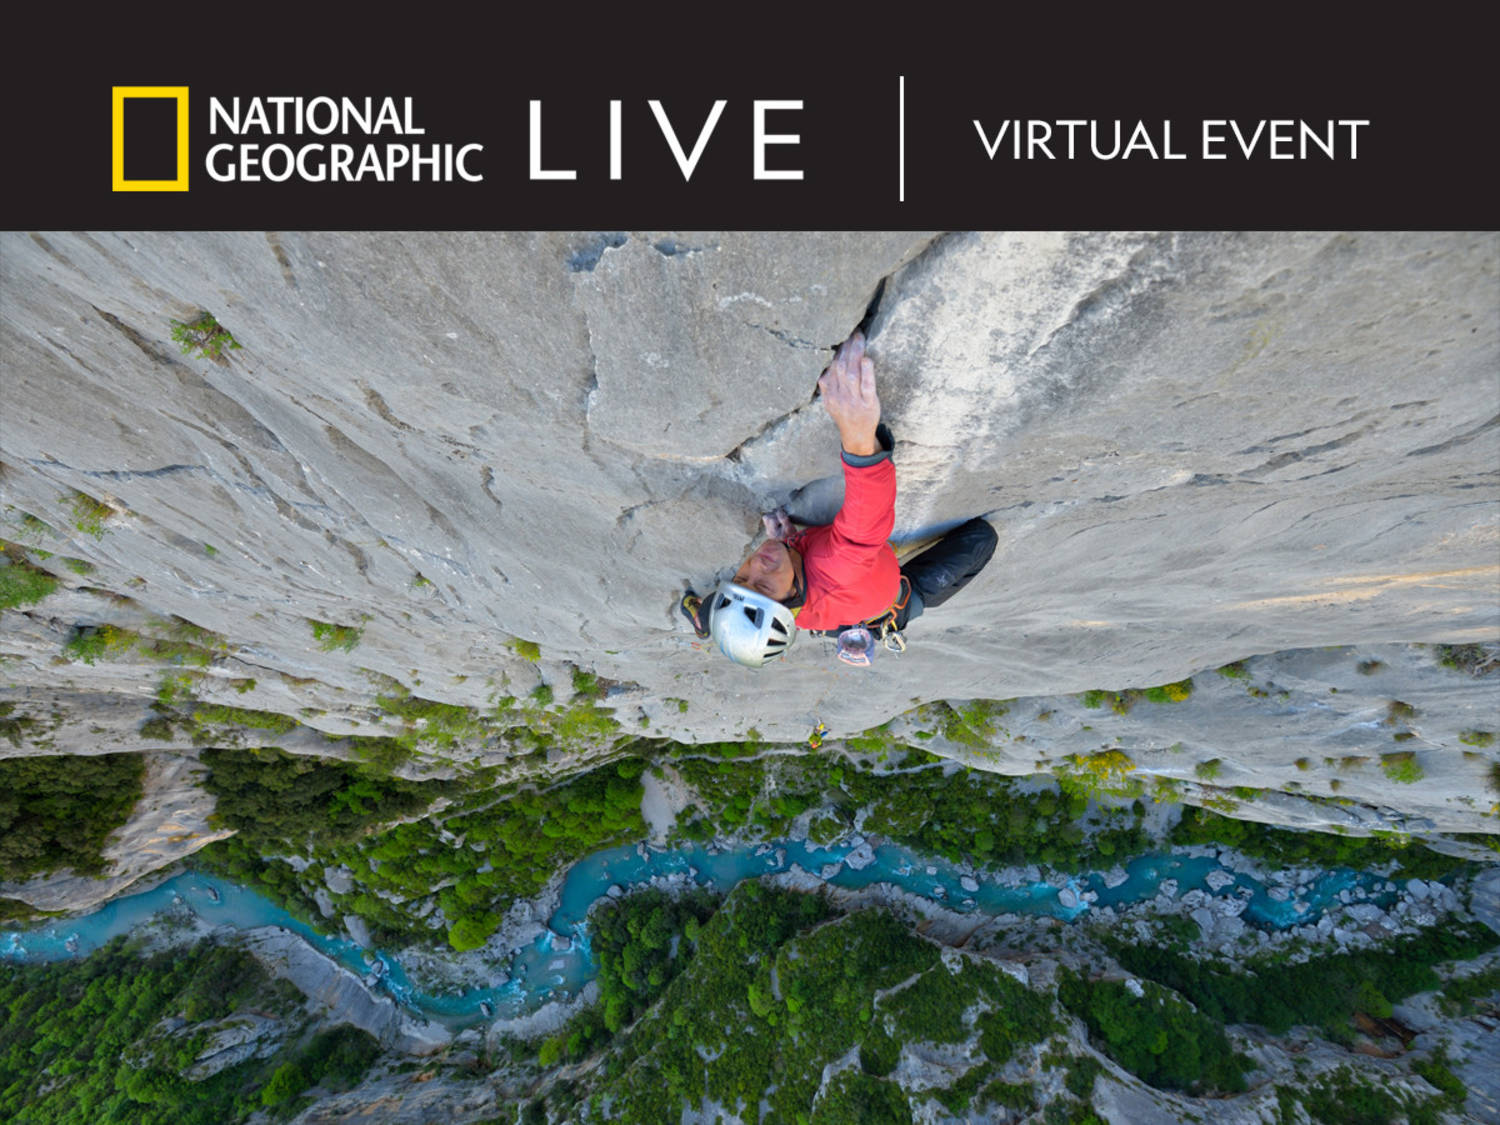 Adventure filmmaking in the spotlight during third National Geographic Live virtual event presented by The Mendel Center